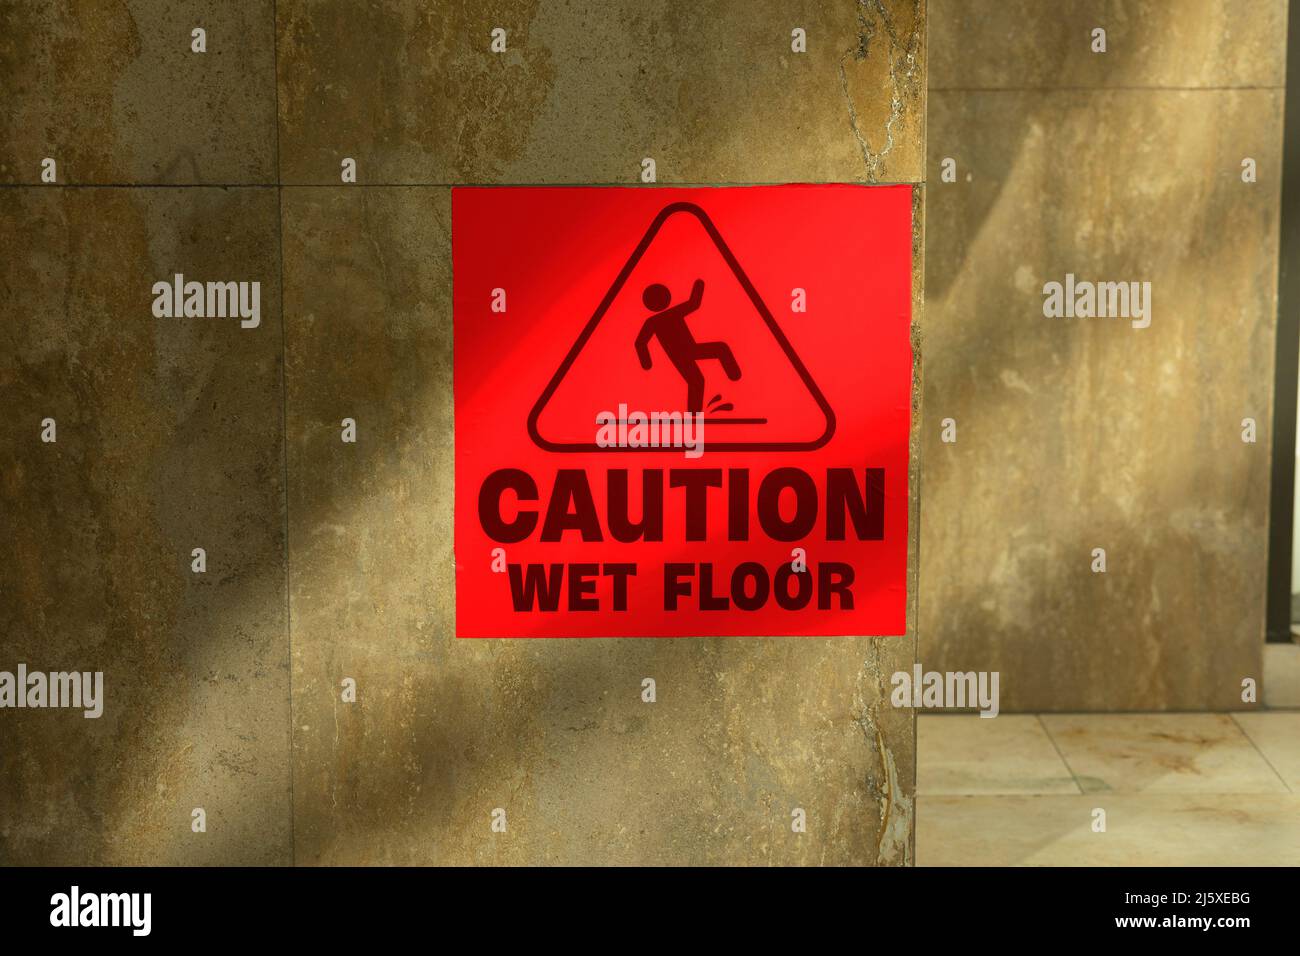 caution wet floor sign in red colour Stock Photo